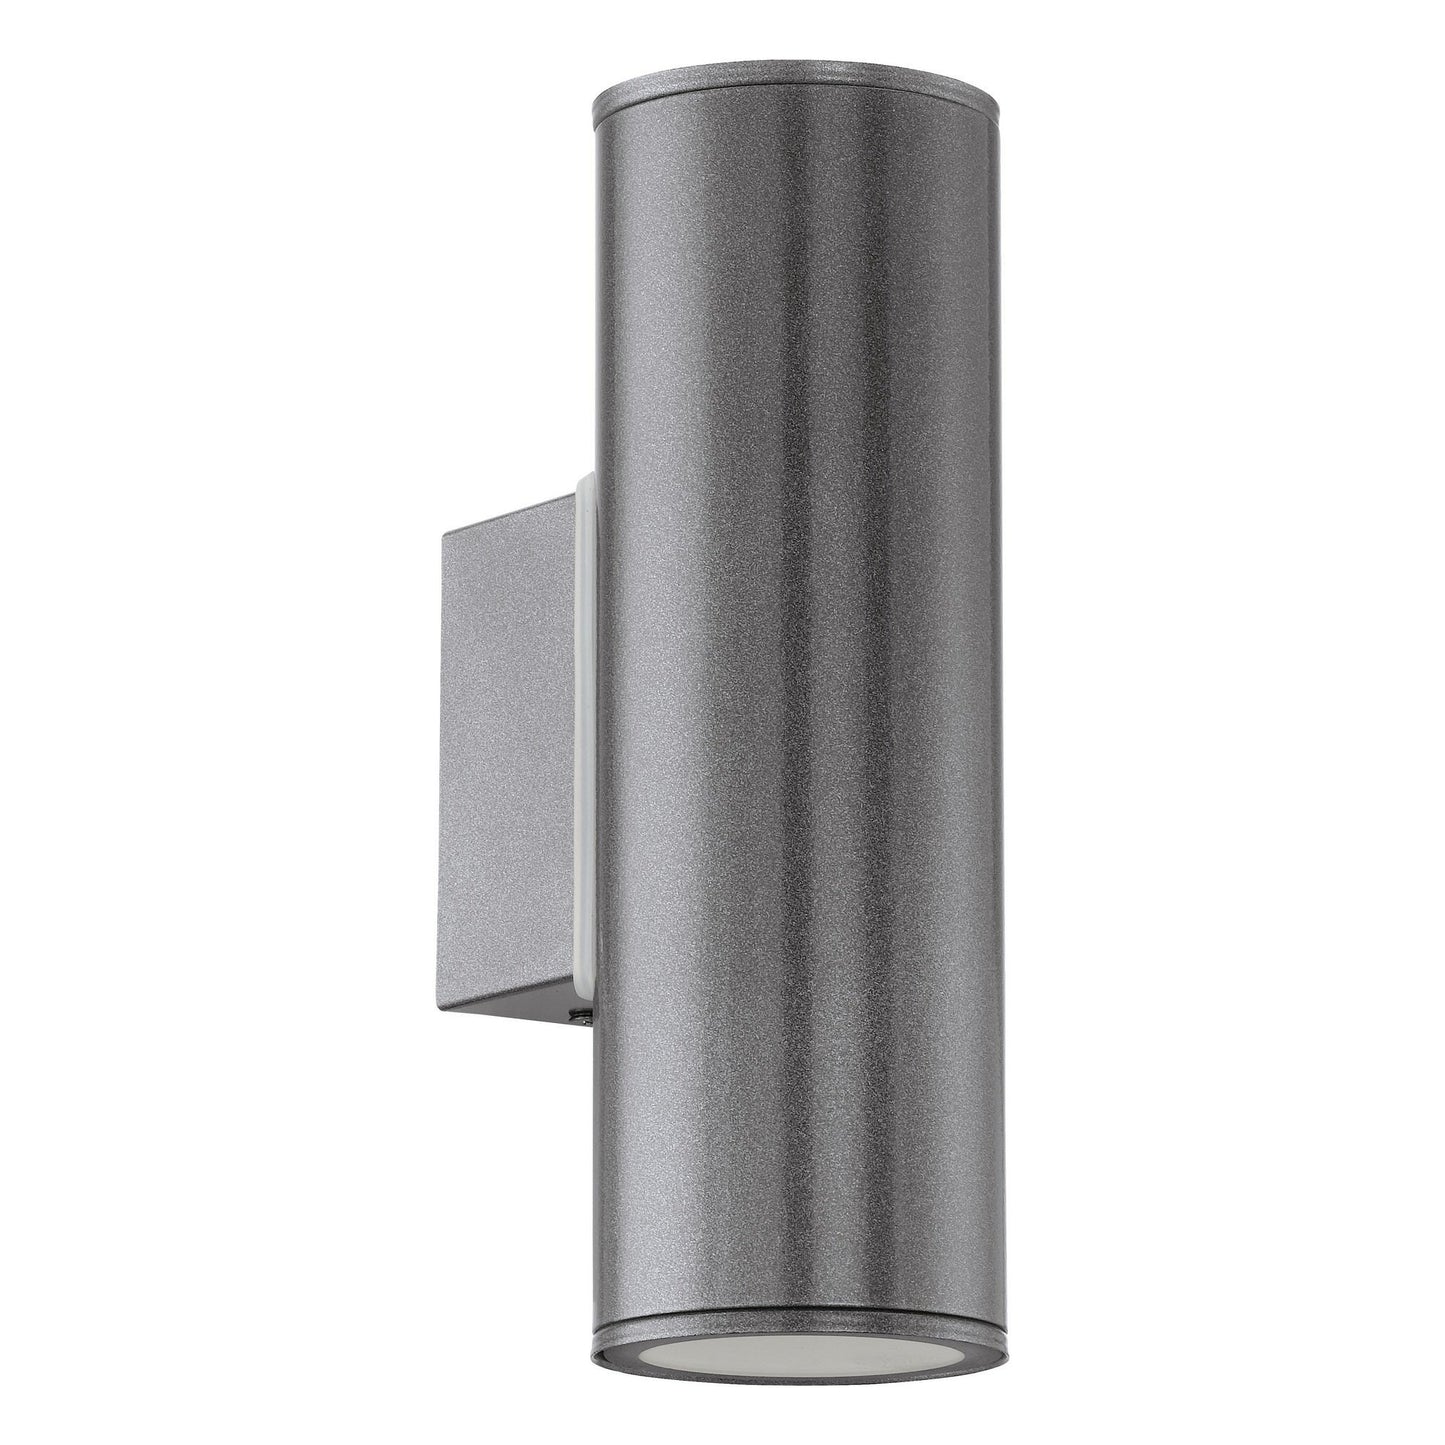 Riga IP44 Metal Outdoor Wall Light, Up & Down, Anthracite